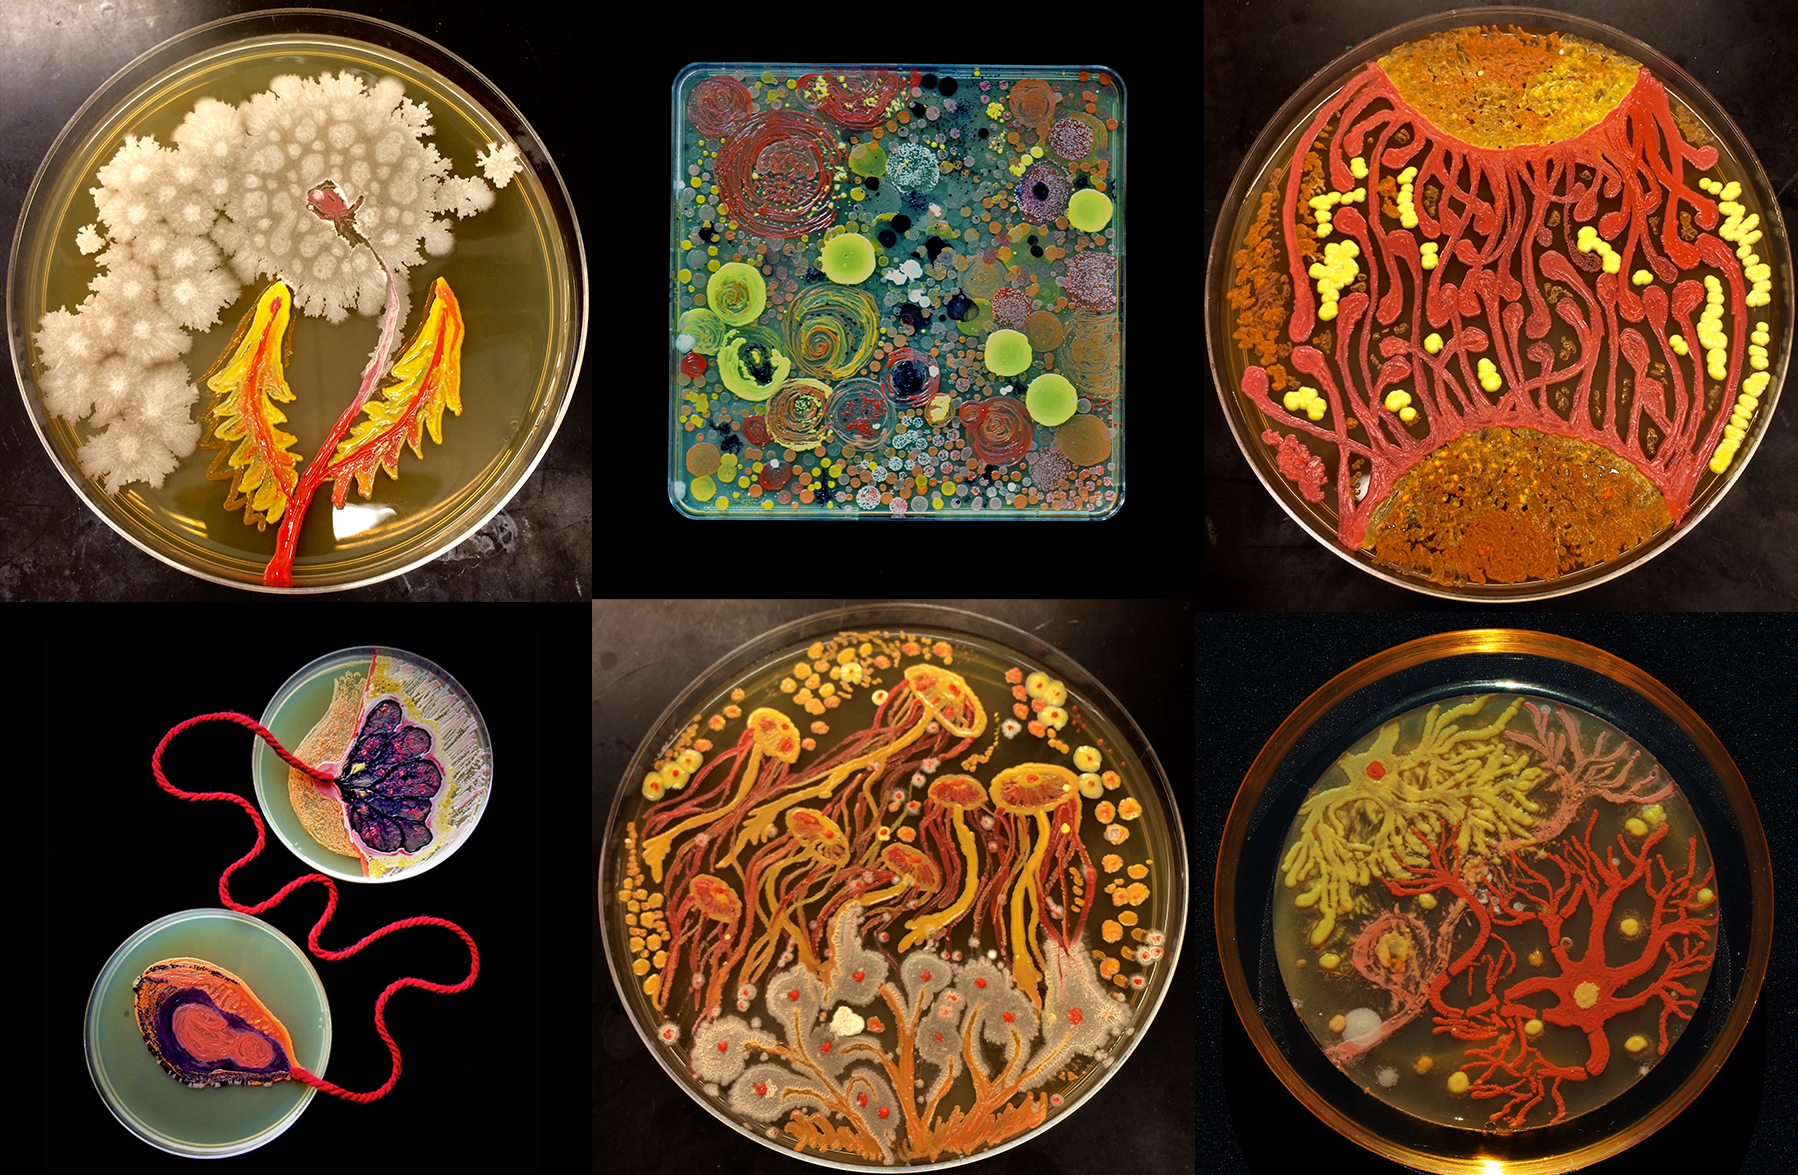 These intricate ‘living’ paintings are teeming with microscopic organisms